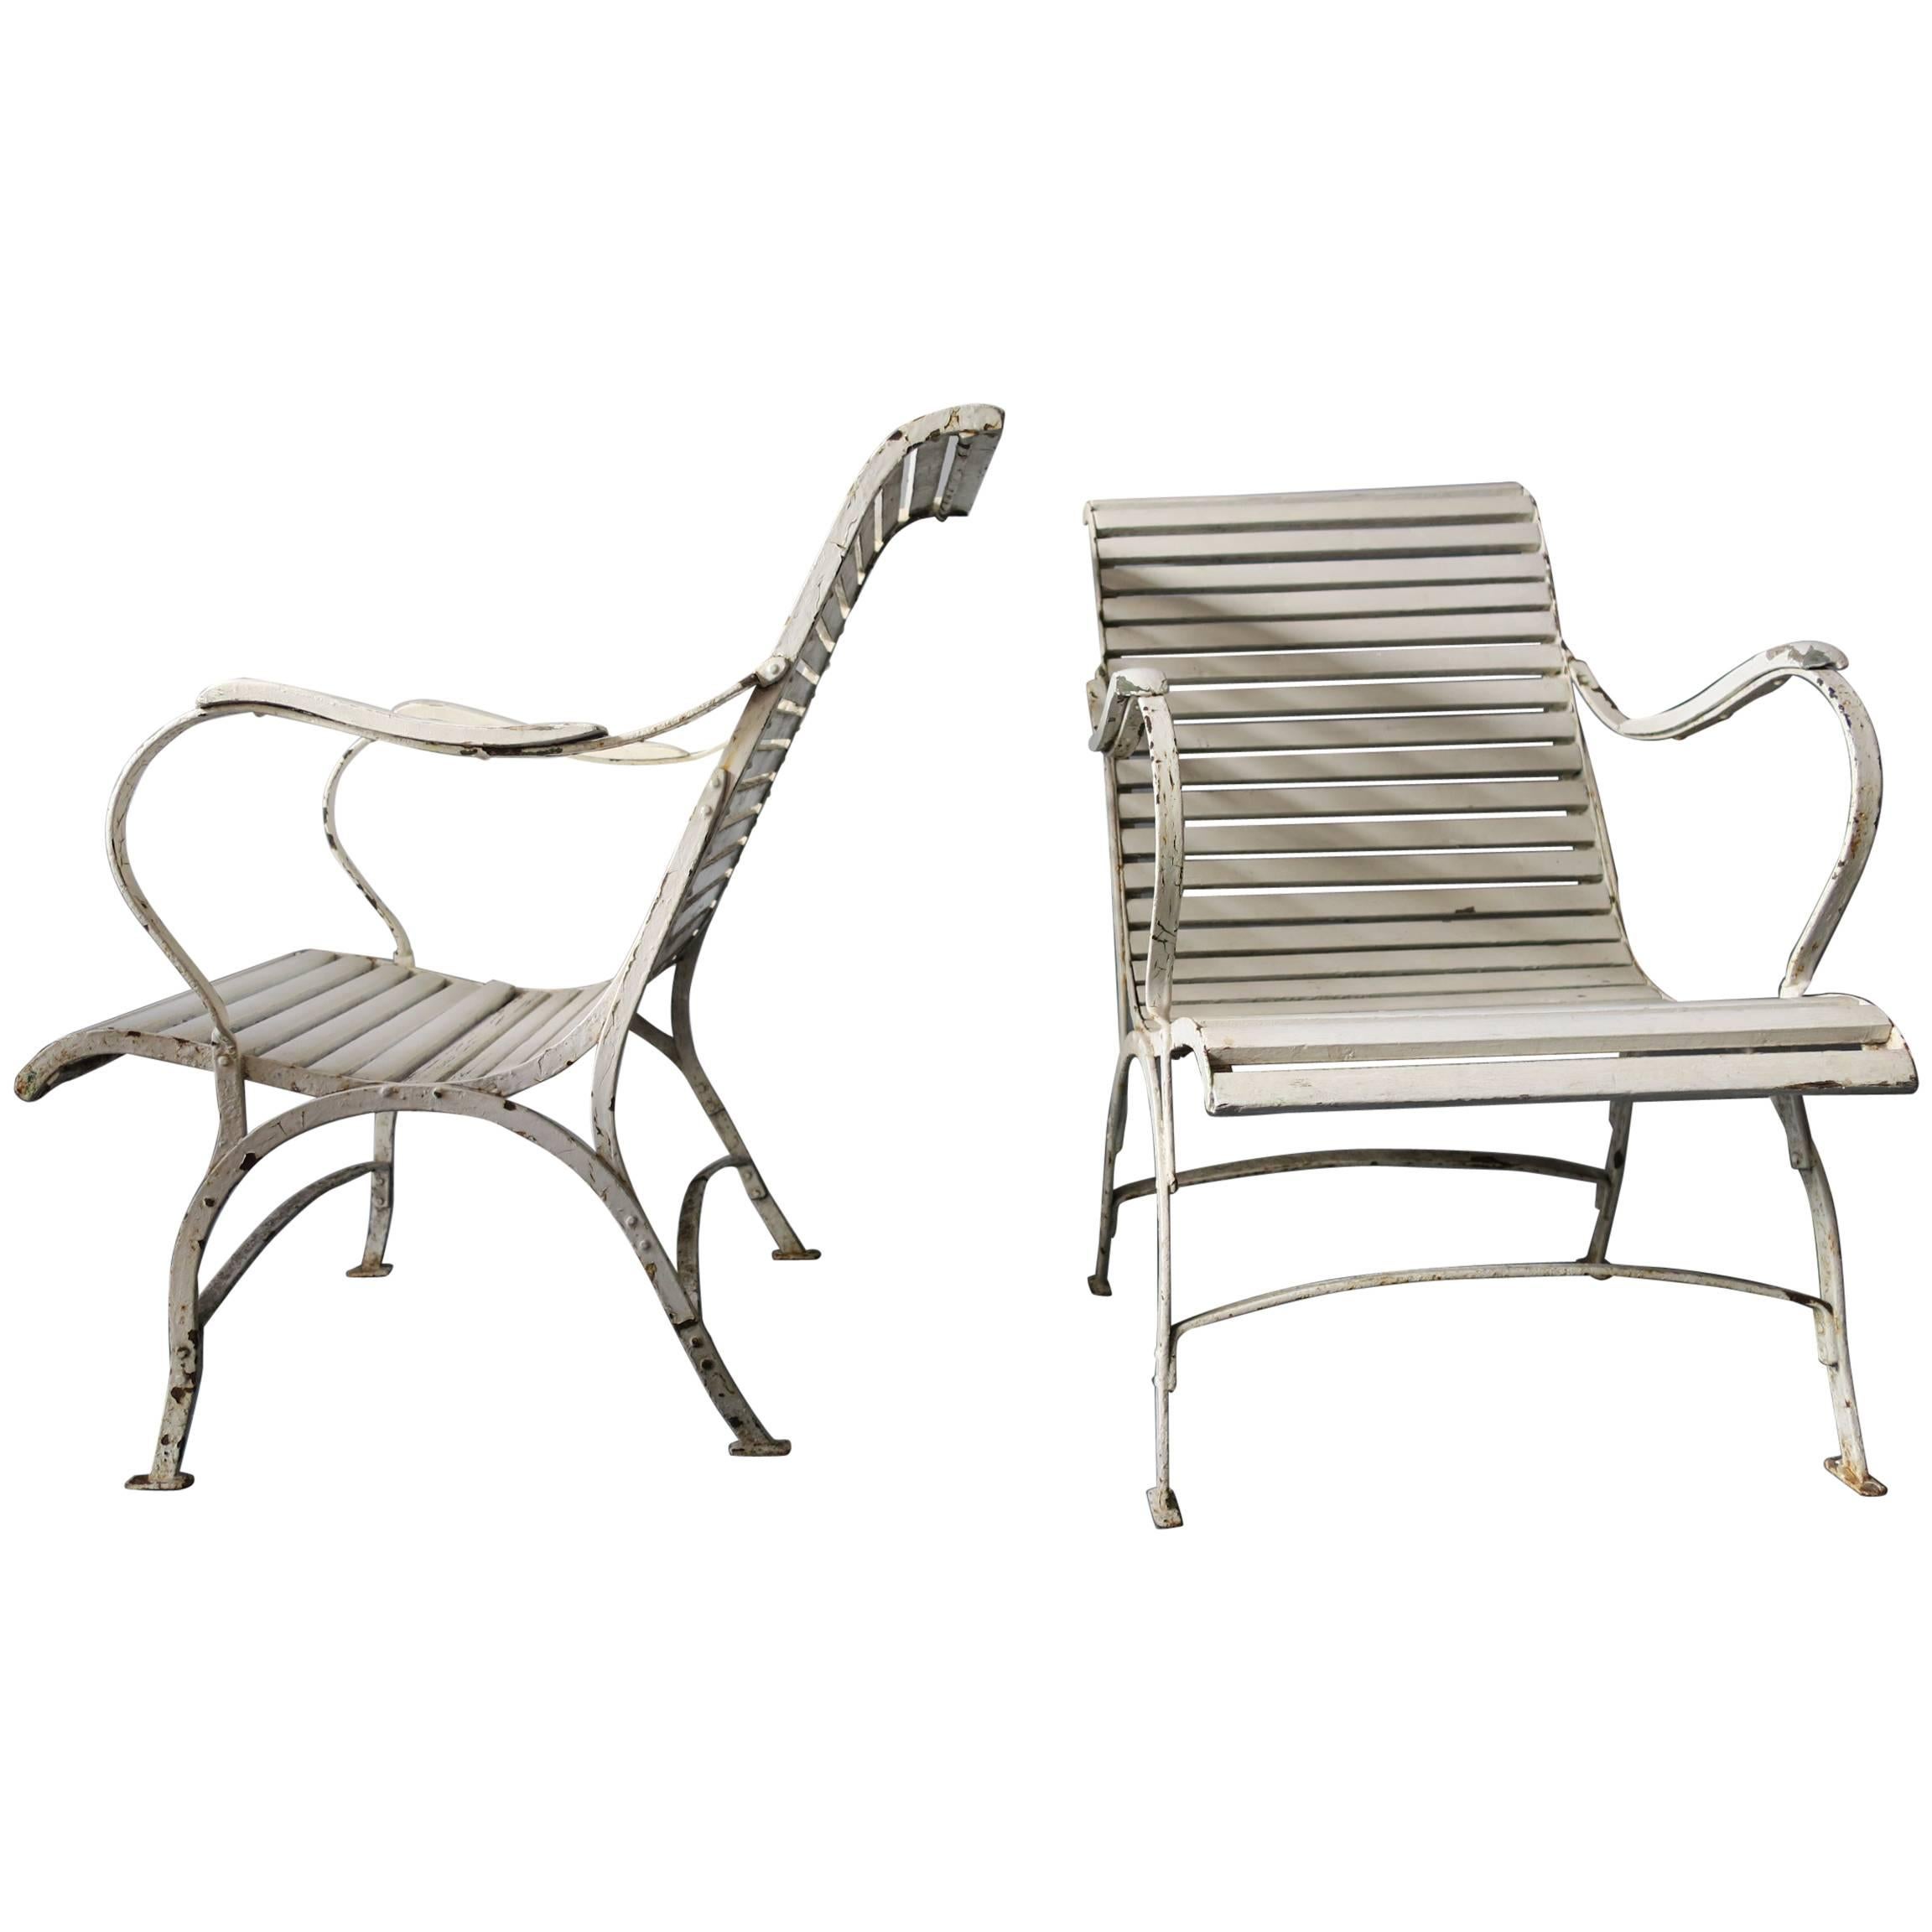 Pair of Painted Iron Garden or Patio Lounge Chairs,  For Sale